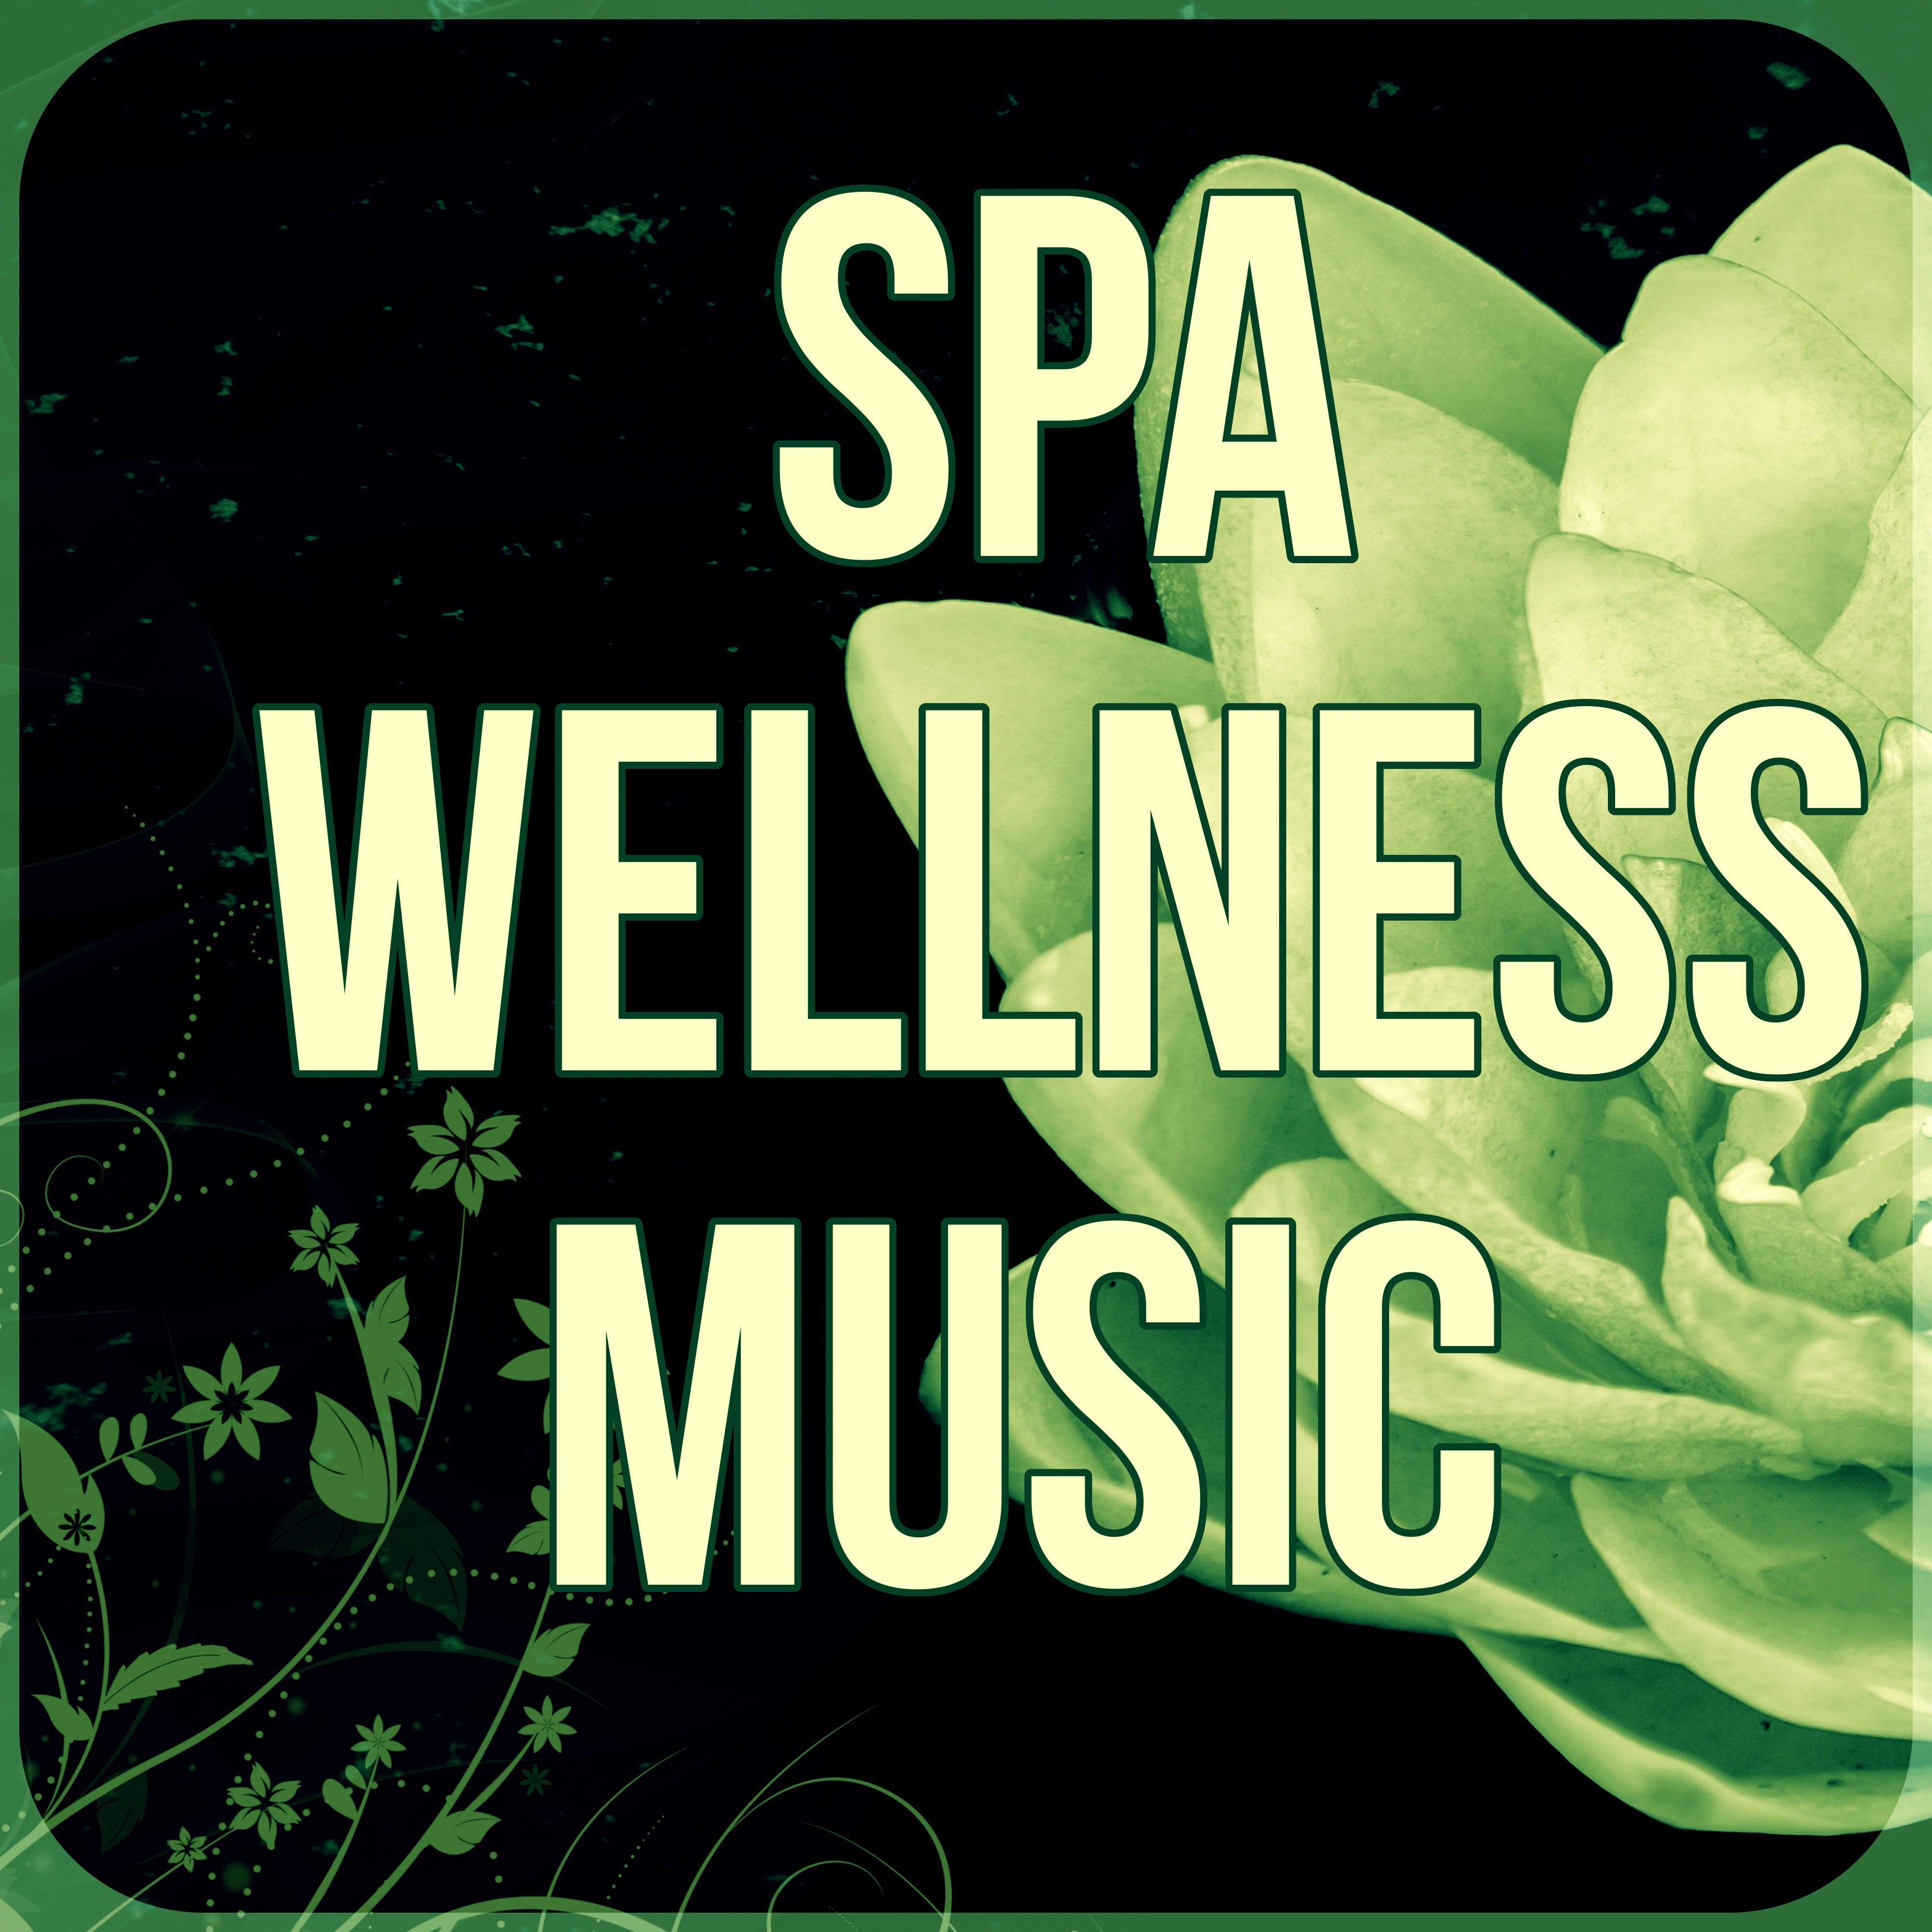 Spa Wellness Music  New Age Music for Massage, Music Therapy, Ocean Waves, Hydro Energy Body Massage, First Class, Aromatherapy, Wellness, WellBeing